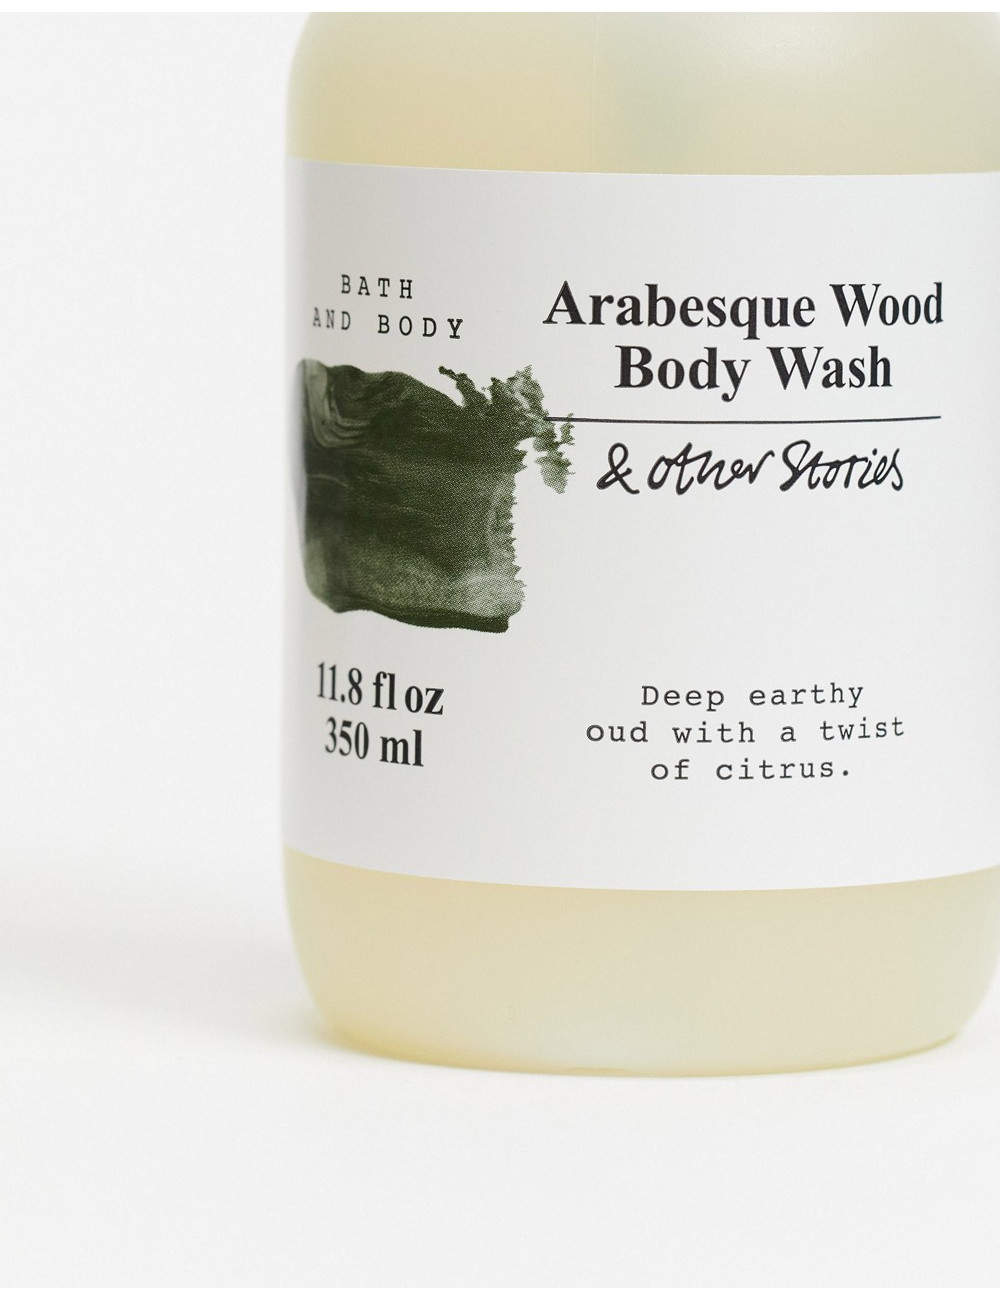 & Other Stories body wash...